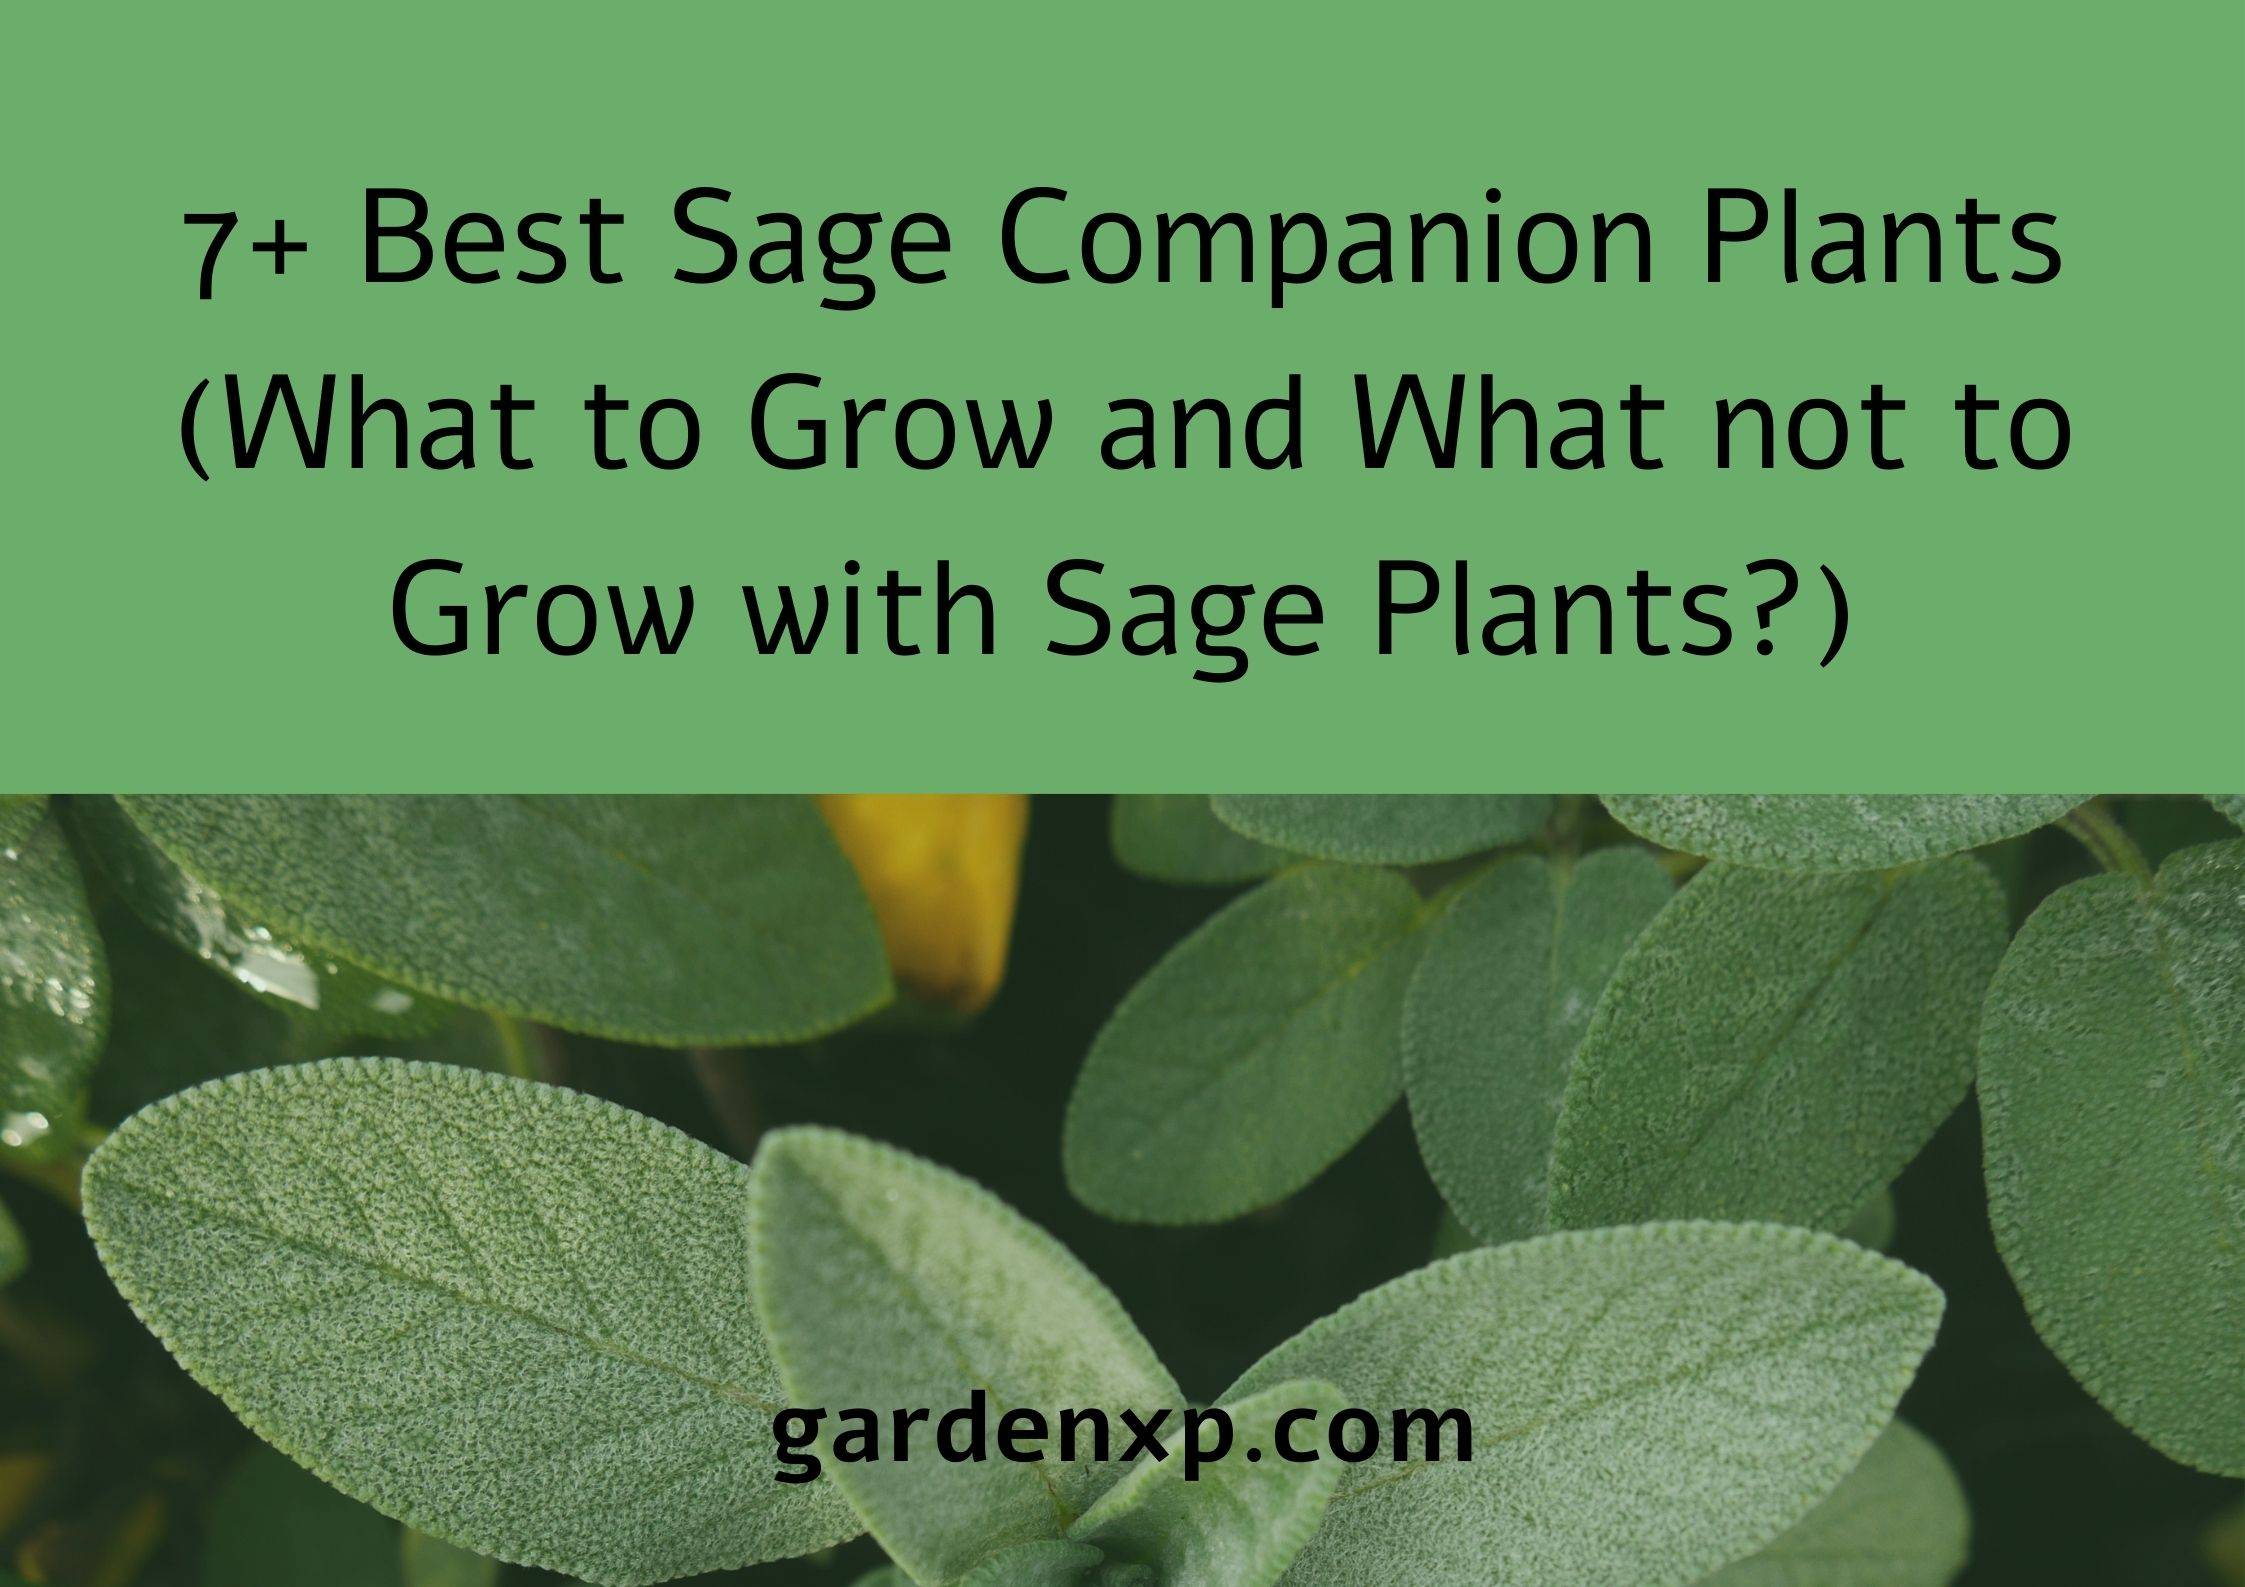 7+ Best Sage Companion Plants (What to Grow and What not to Grow with Sage Plants?)